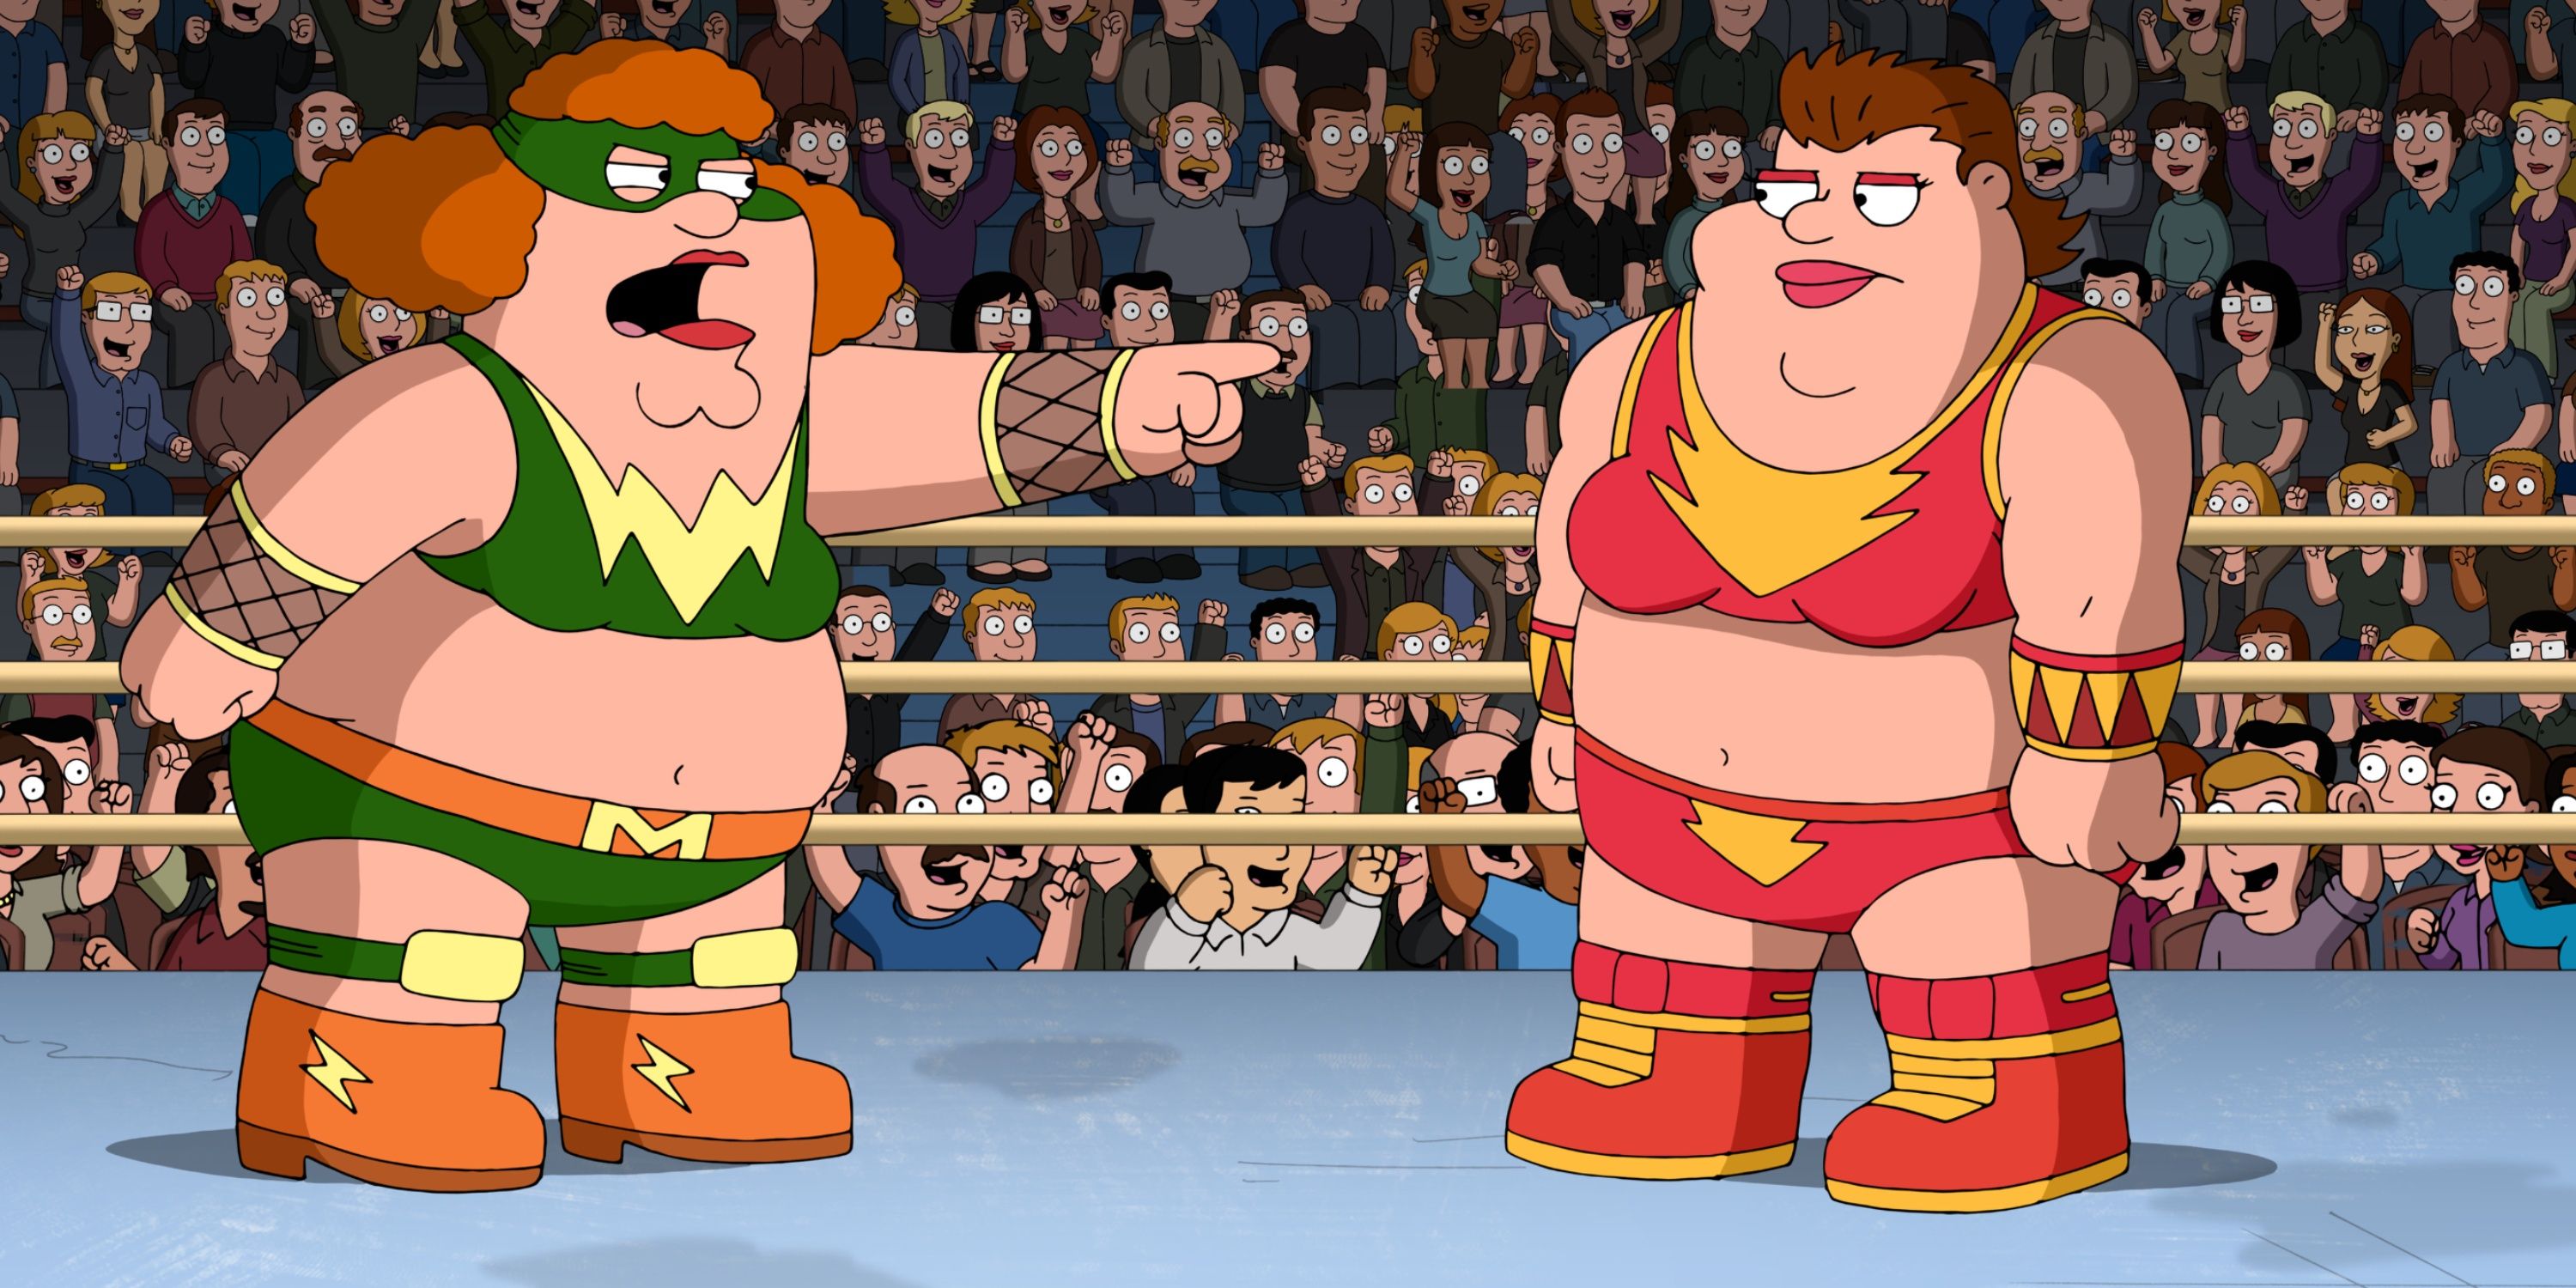 Karen and Peter Griffin fight each other in Family Guy